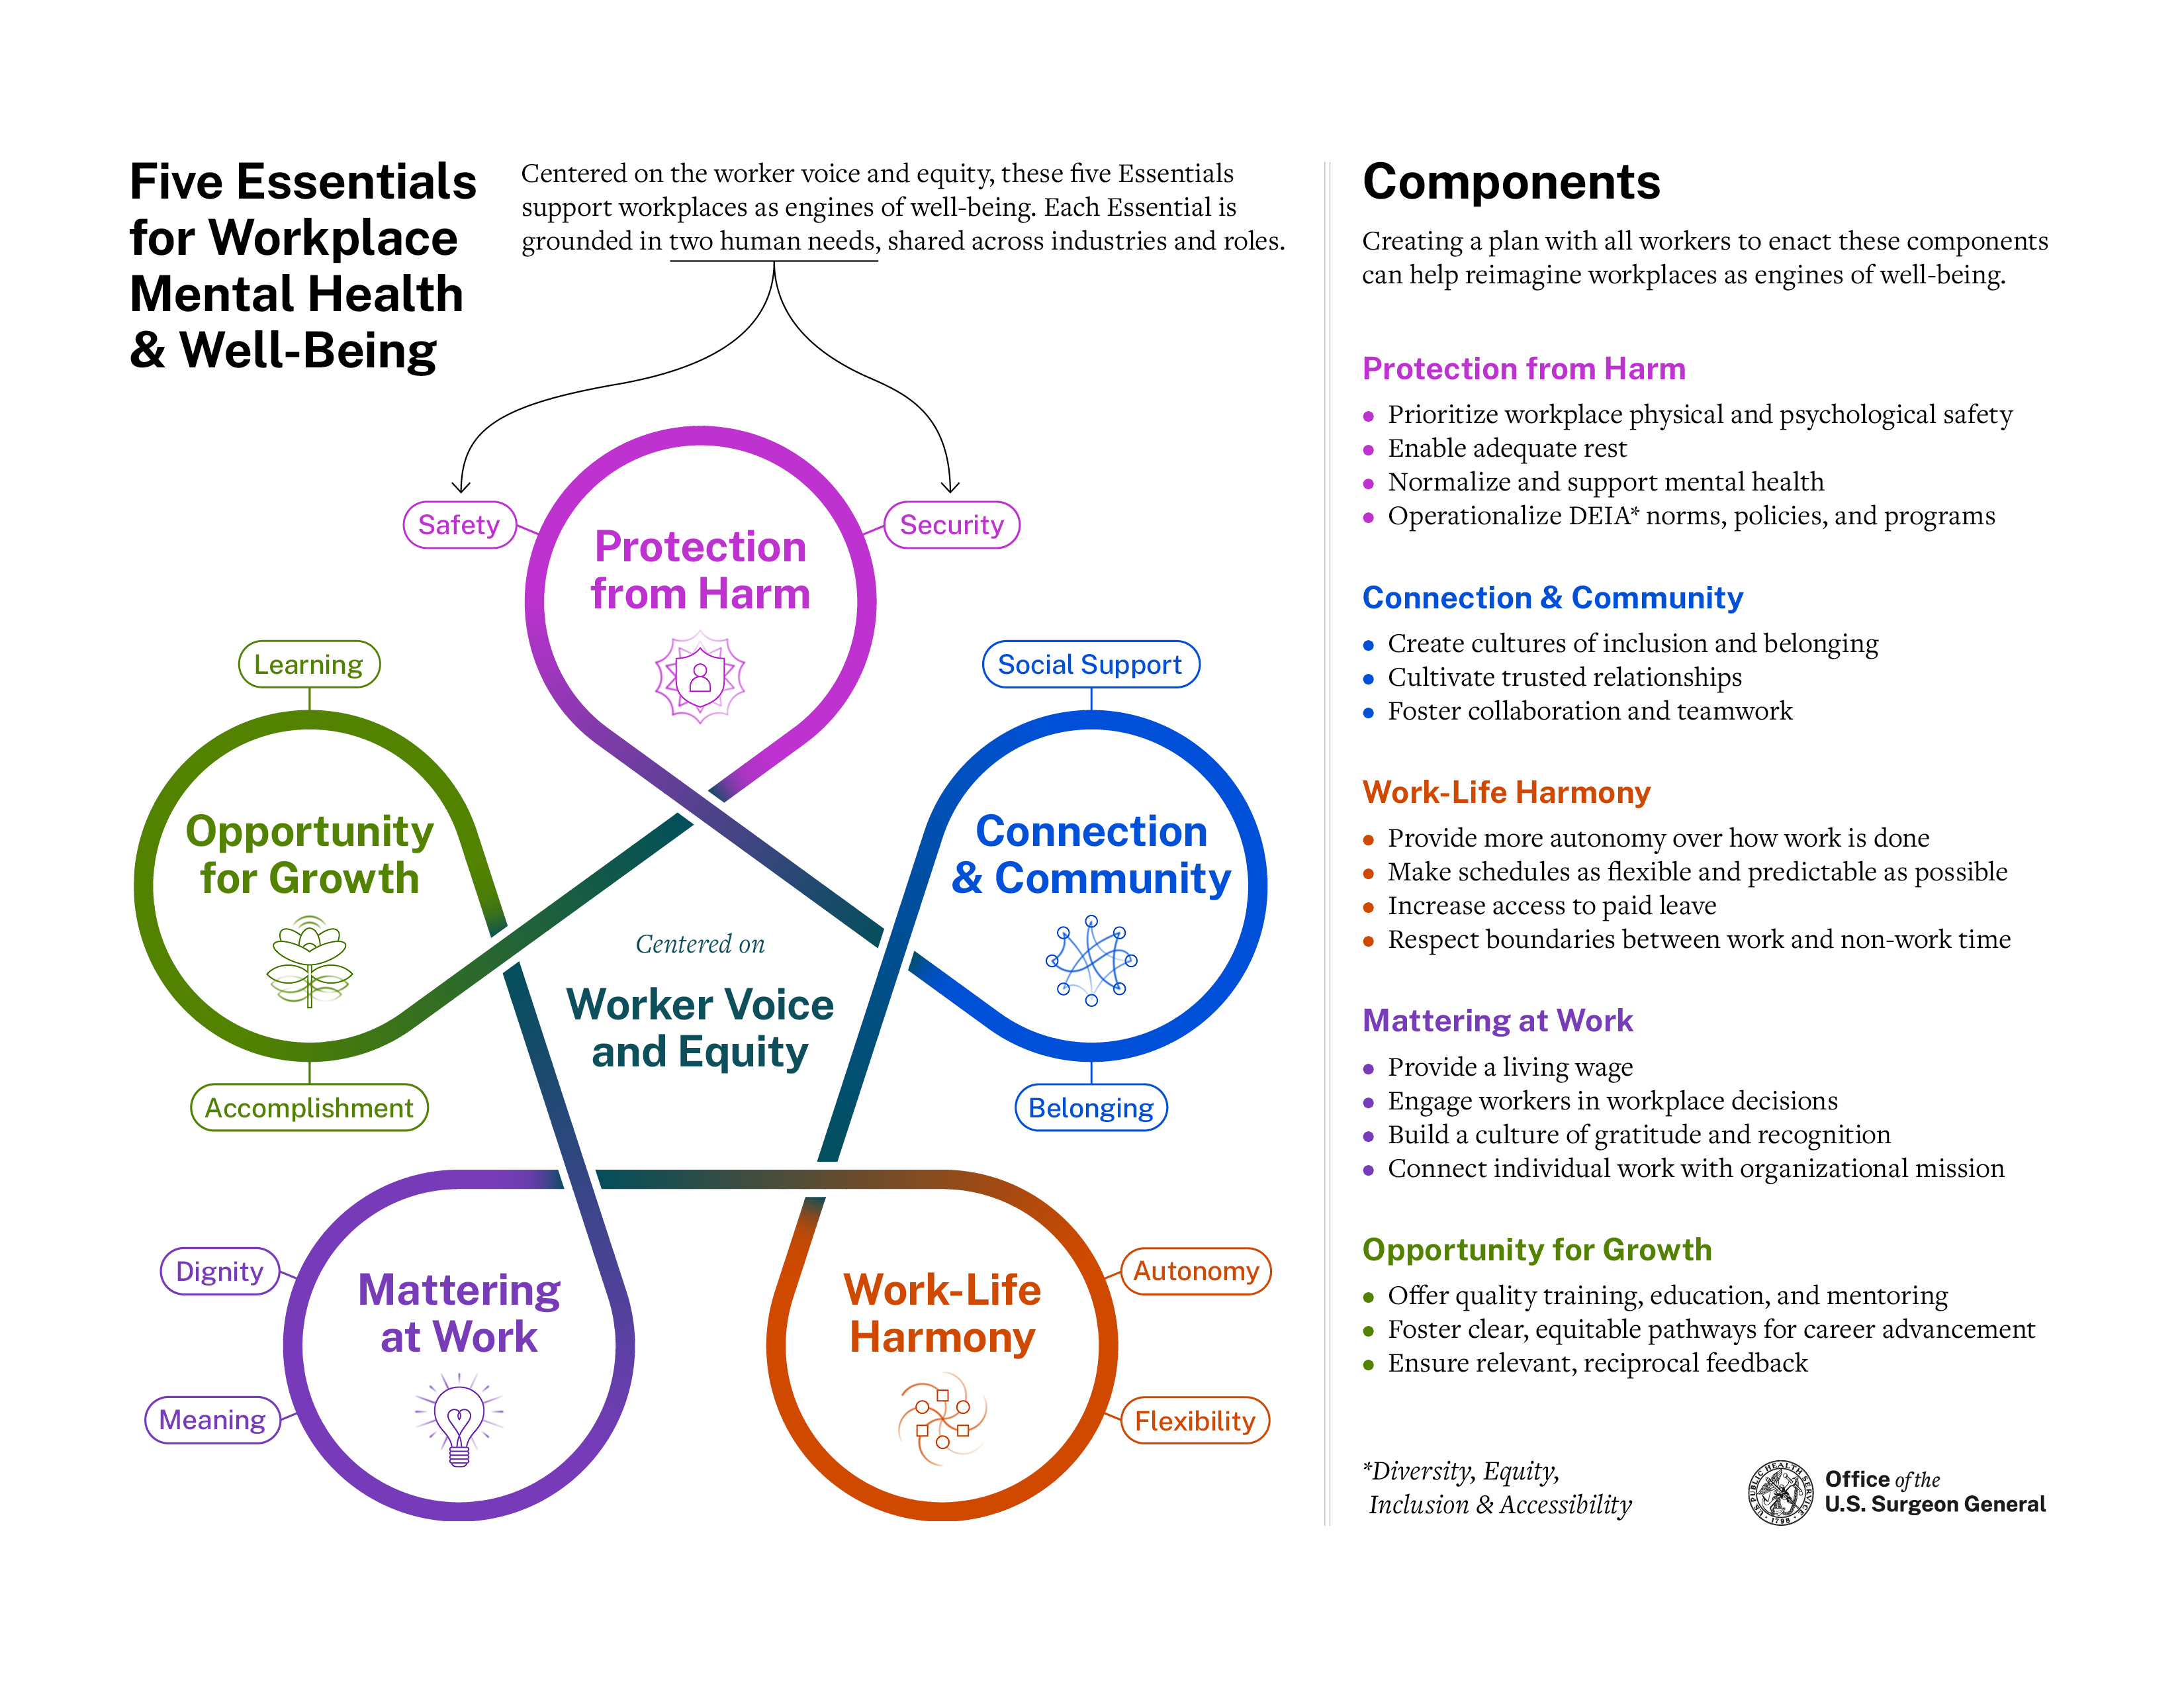 Workplace Framework graphic released by the Surgeon General to help workplace mental health